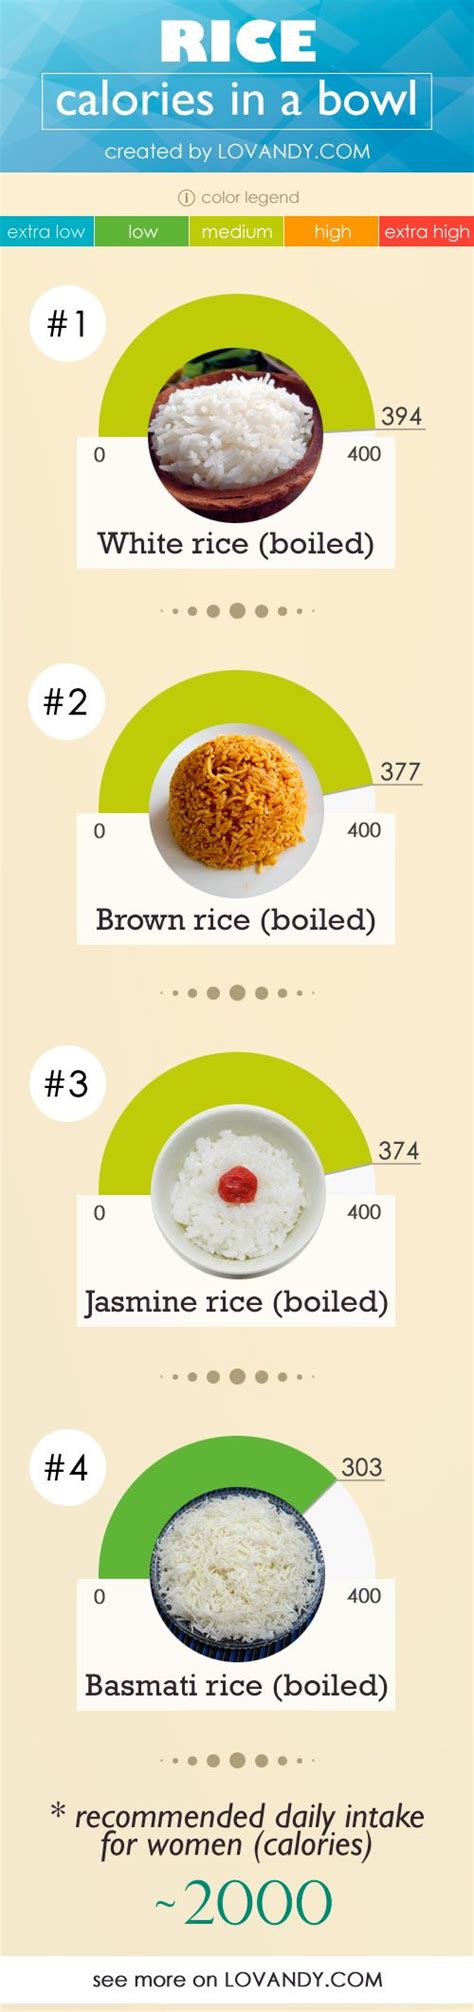  When you are considering basmati rice which is extra long and slender consists of 204 calories; the consistency being one cup. When cooked brown basmati is taken into account, the total calorie consistency is 216 calories per cup. As far as the nutritional content is concerned, a cup of rice contains around 45 g carbohydrates, minimal fat; that ... . 